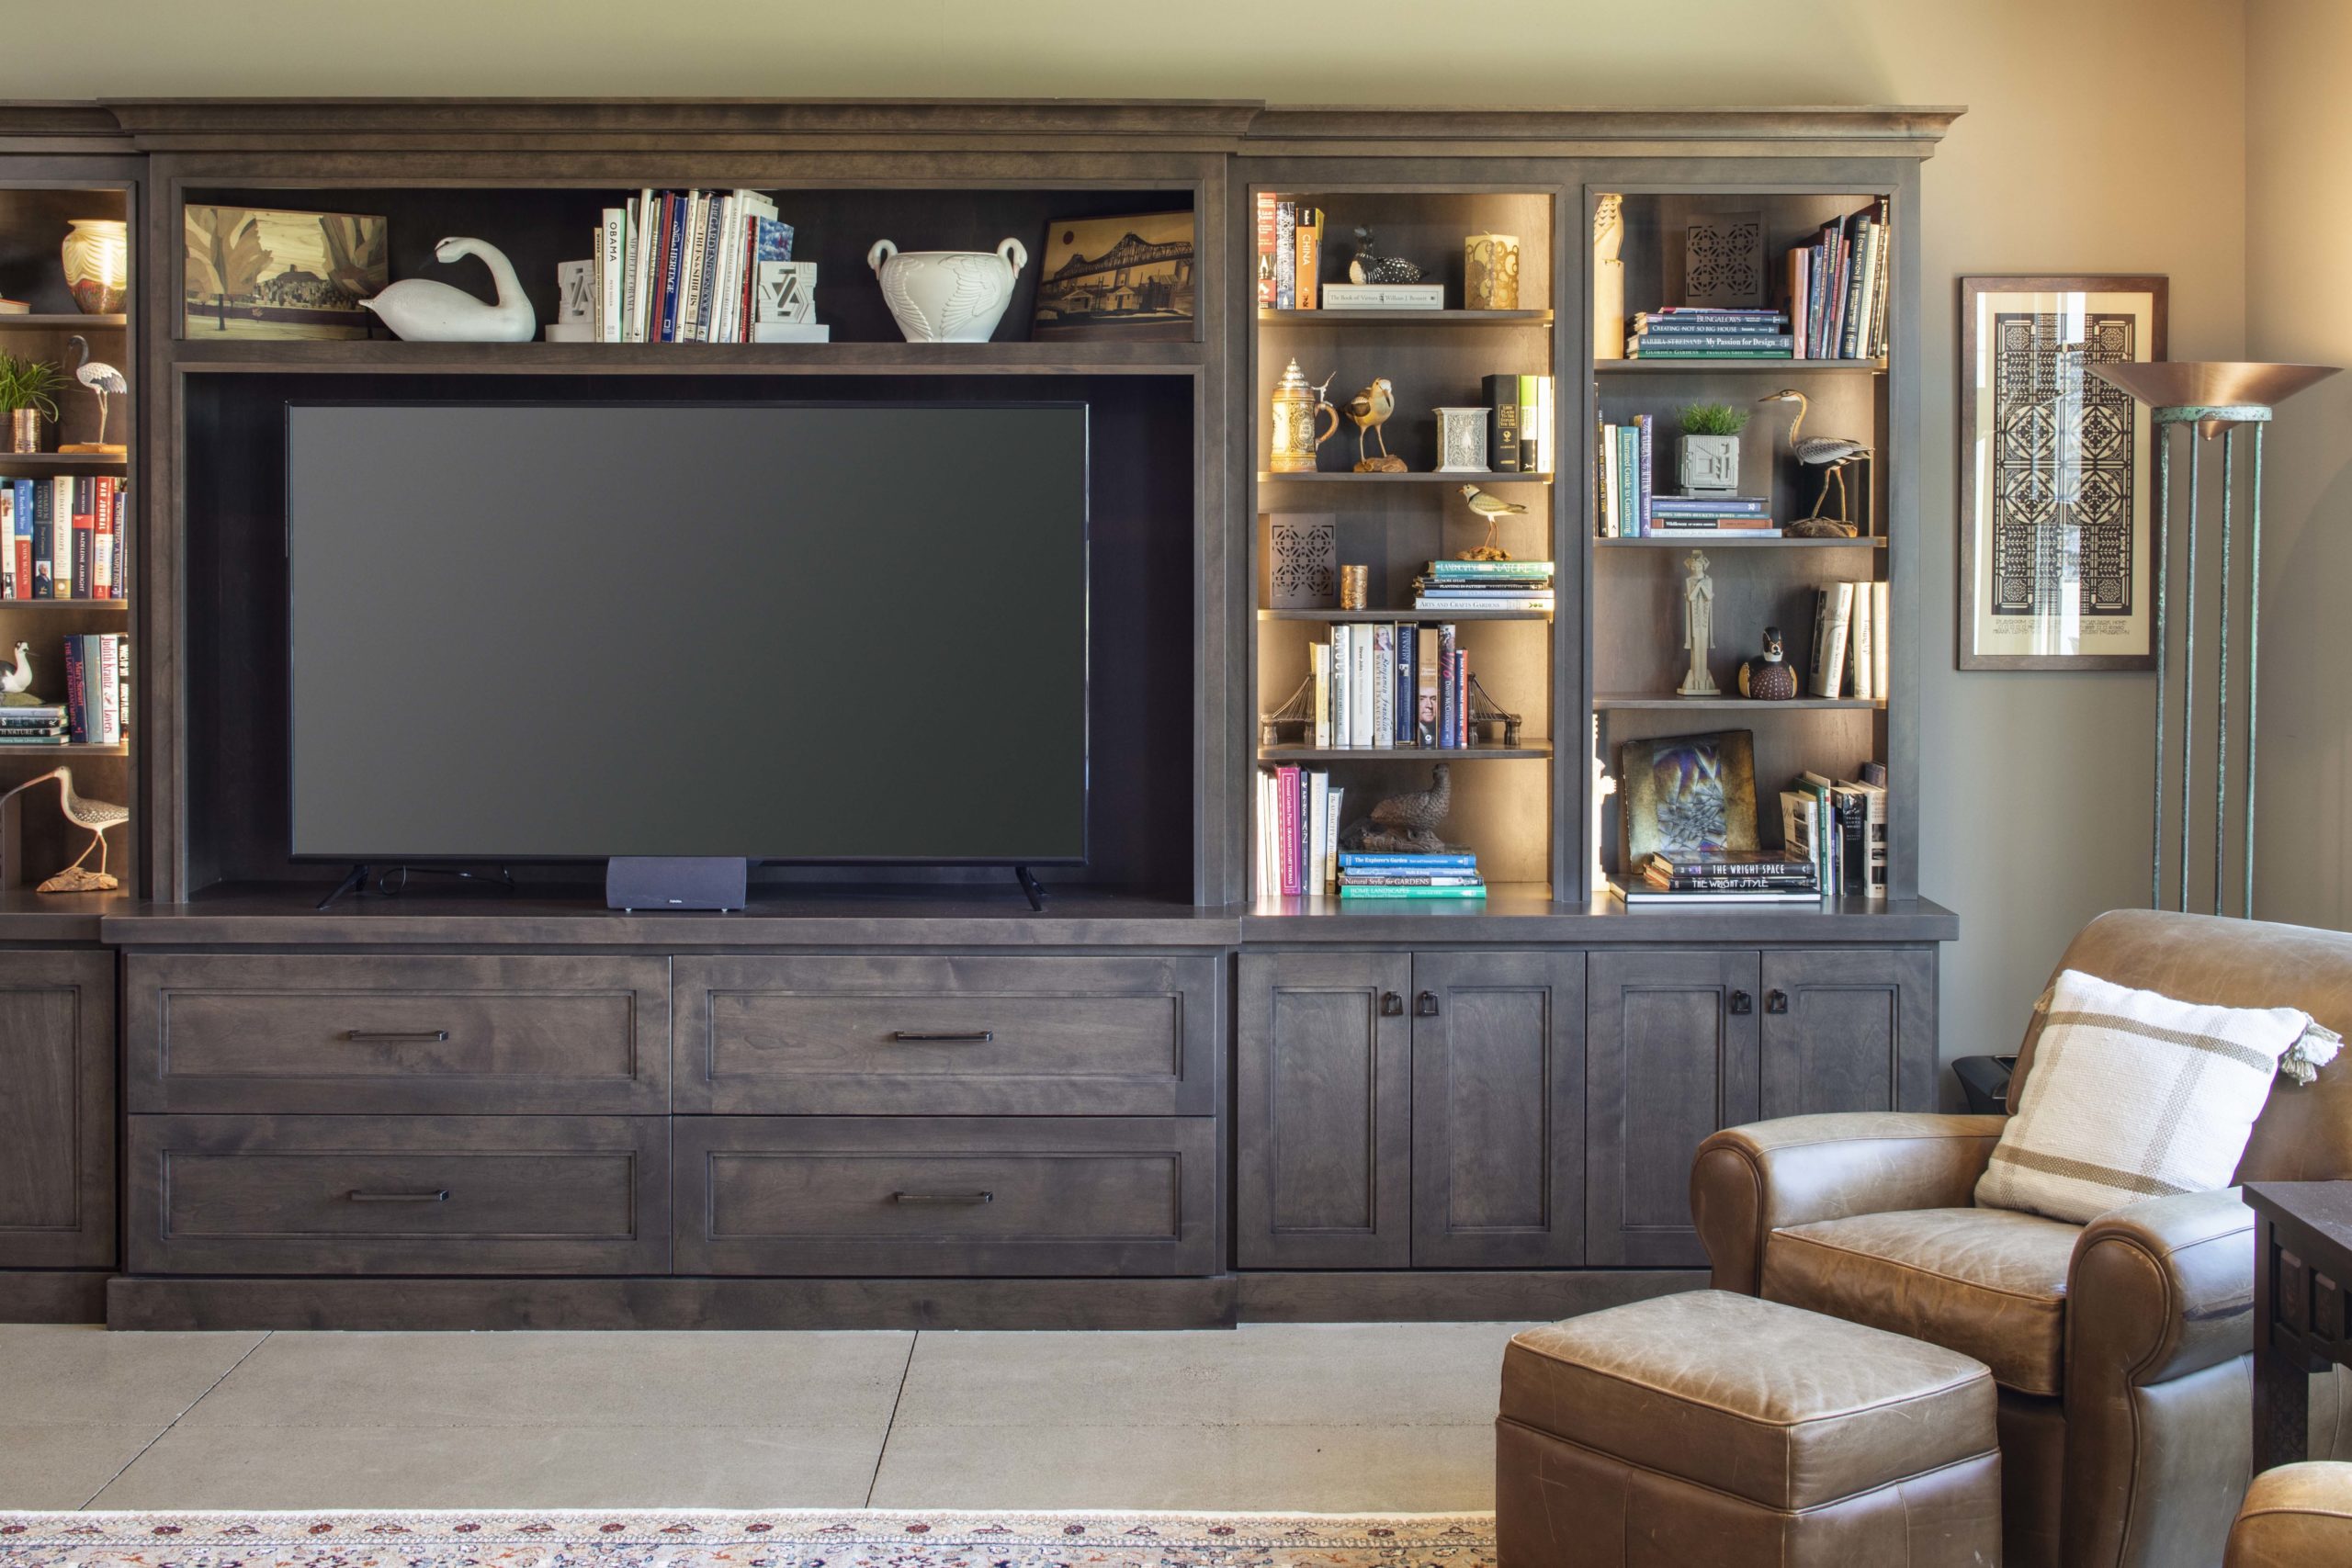 A prairie transitional living room with a tv and bookshelves.